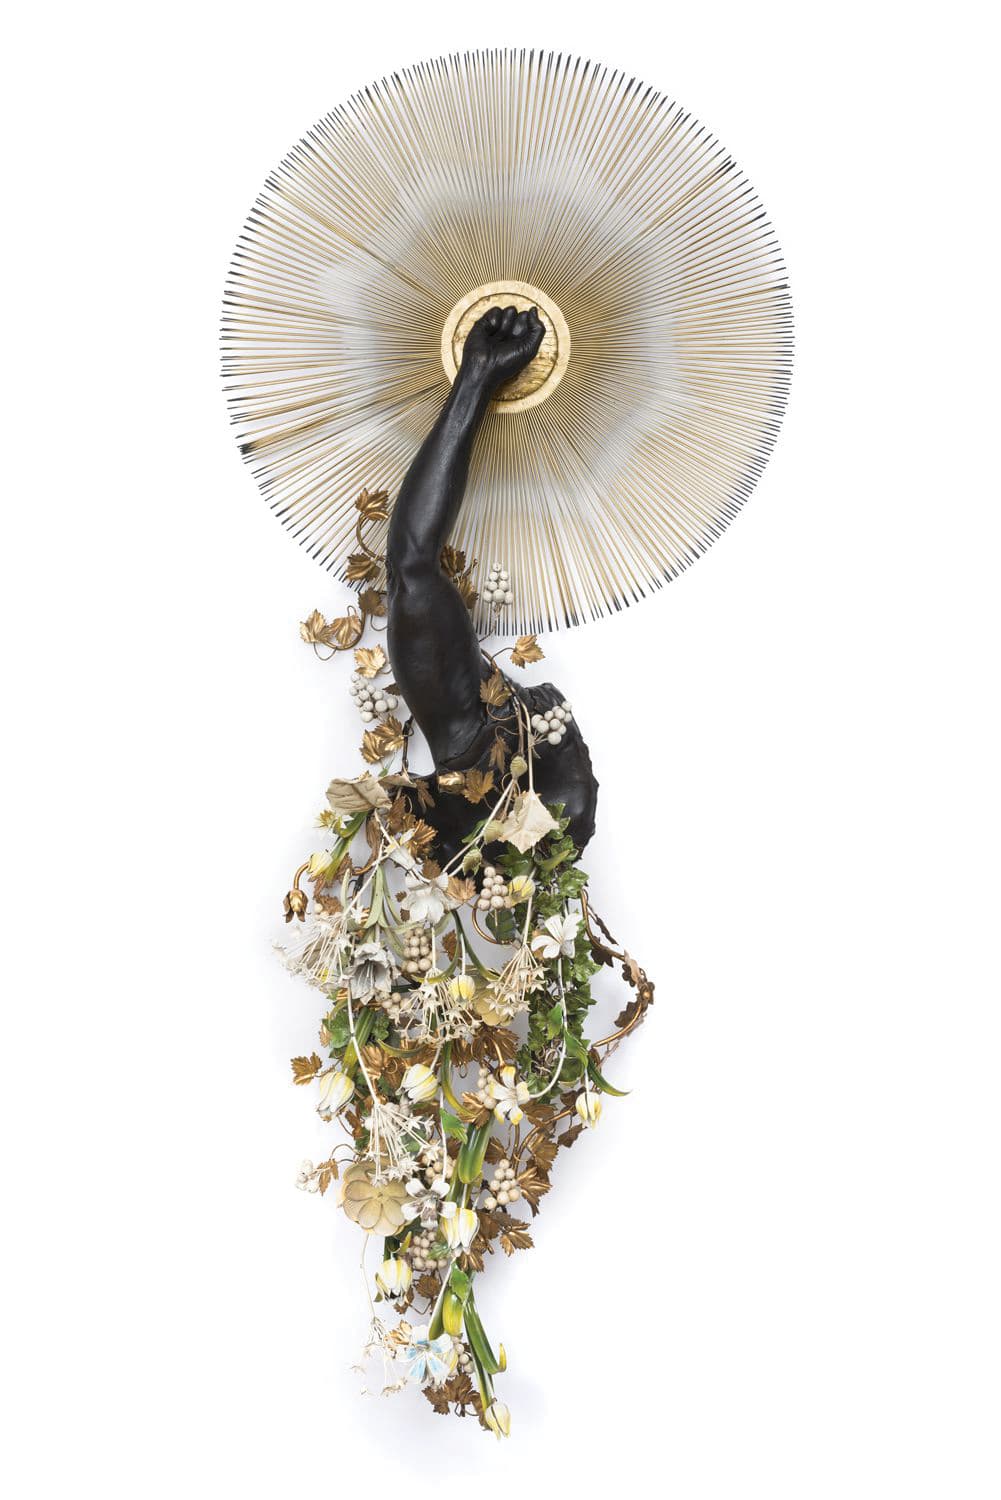 "Assemblage : Arm Peace" by Nick Cave